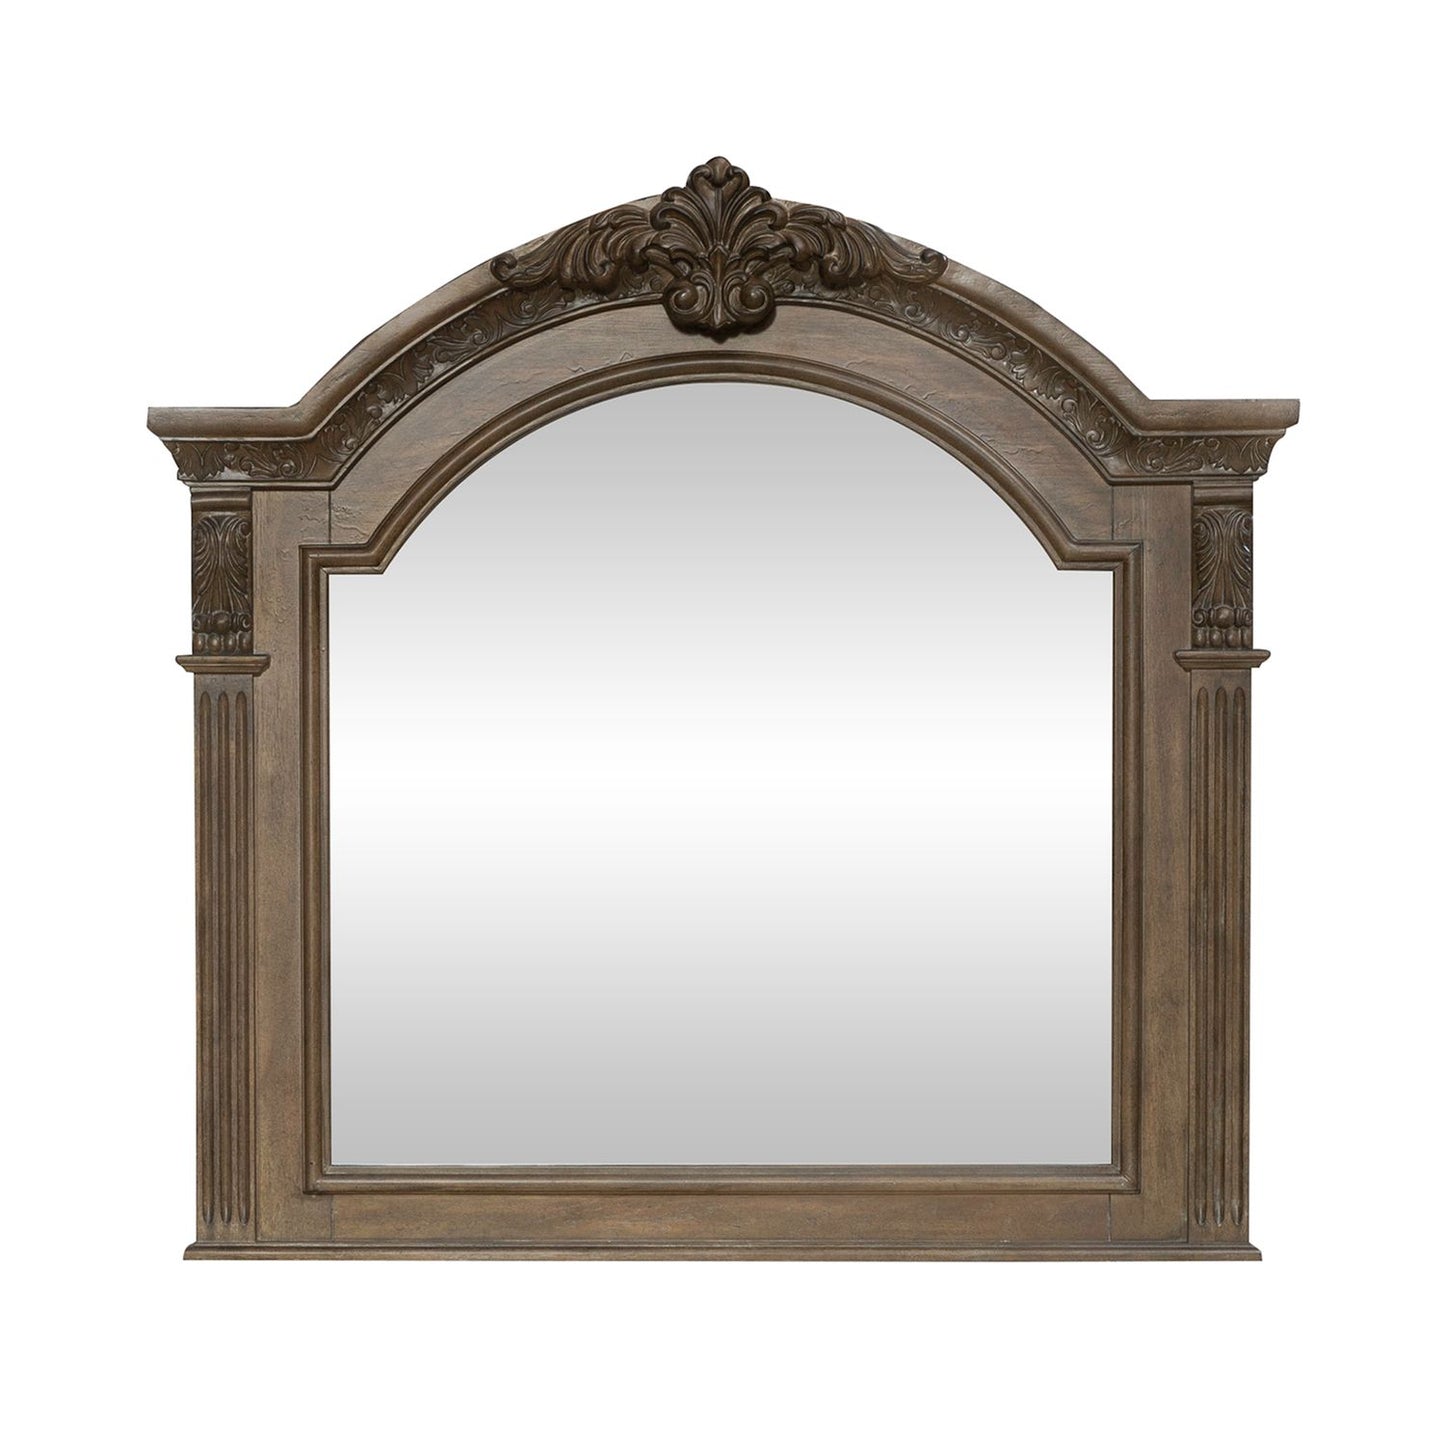 Carlisle Court - Arched Mirror